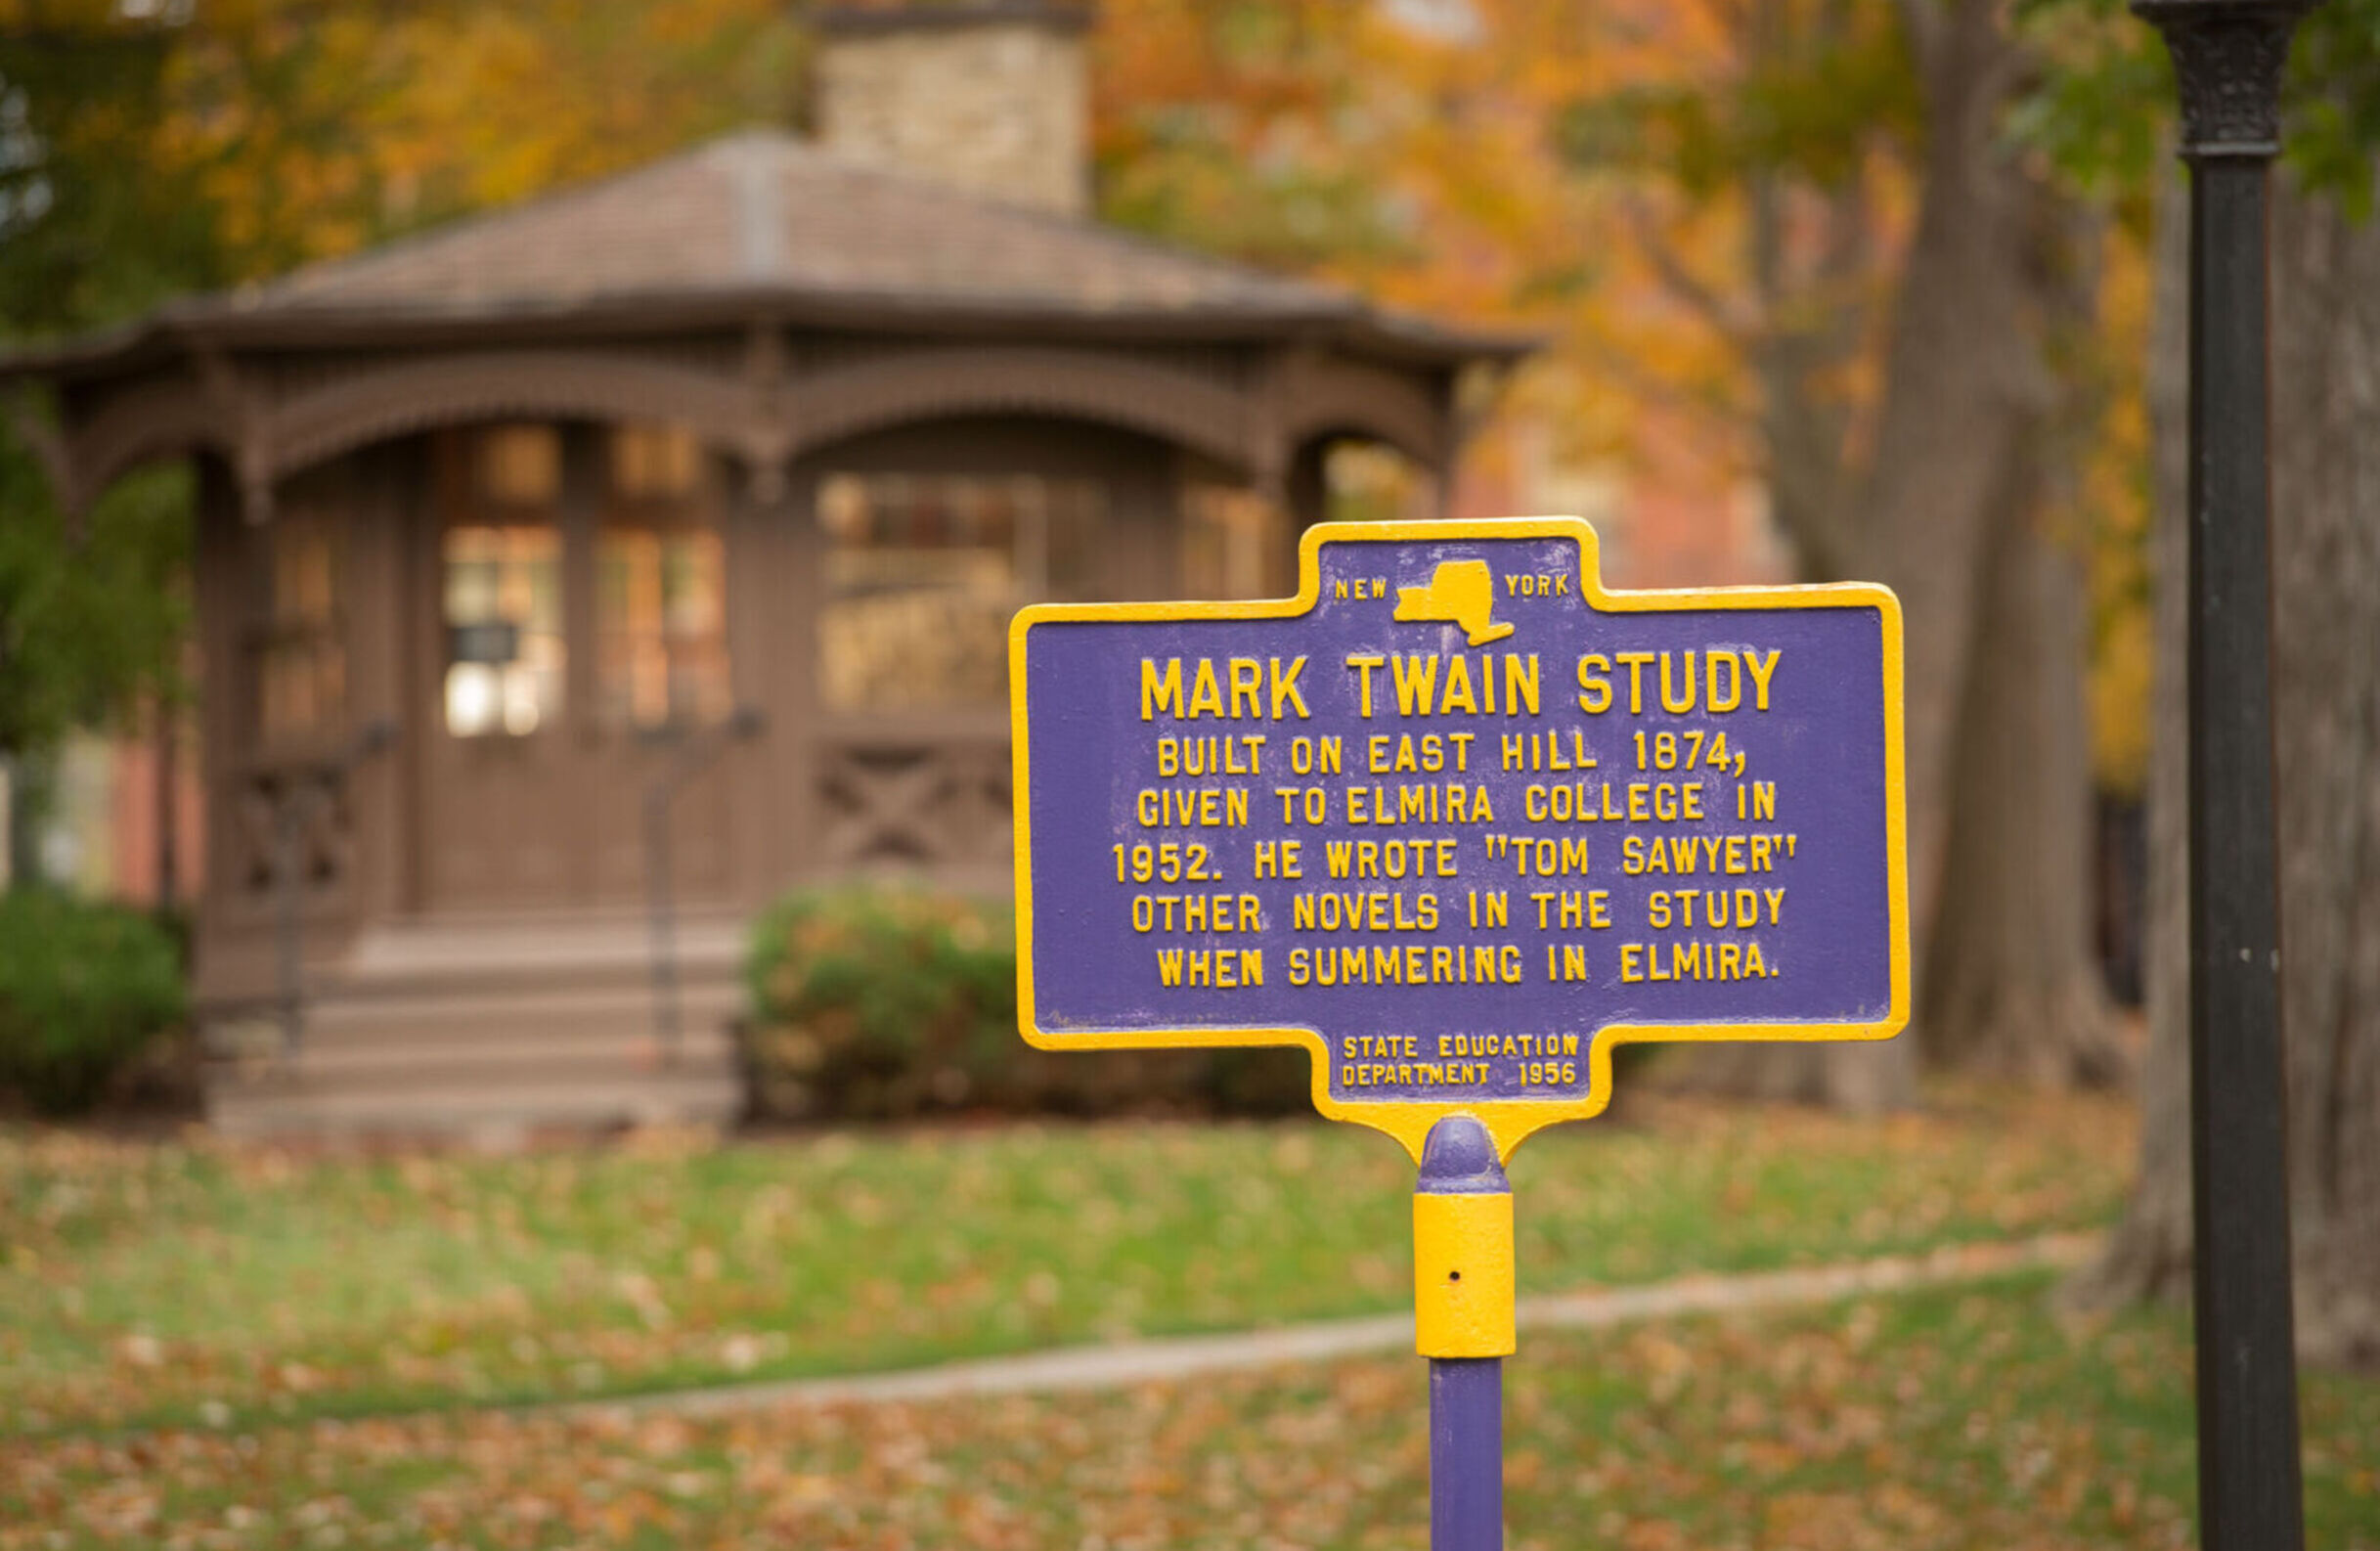 A historical marker in front of the Mark Twain Study on the Elmira College campus